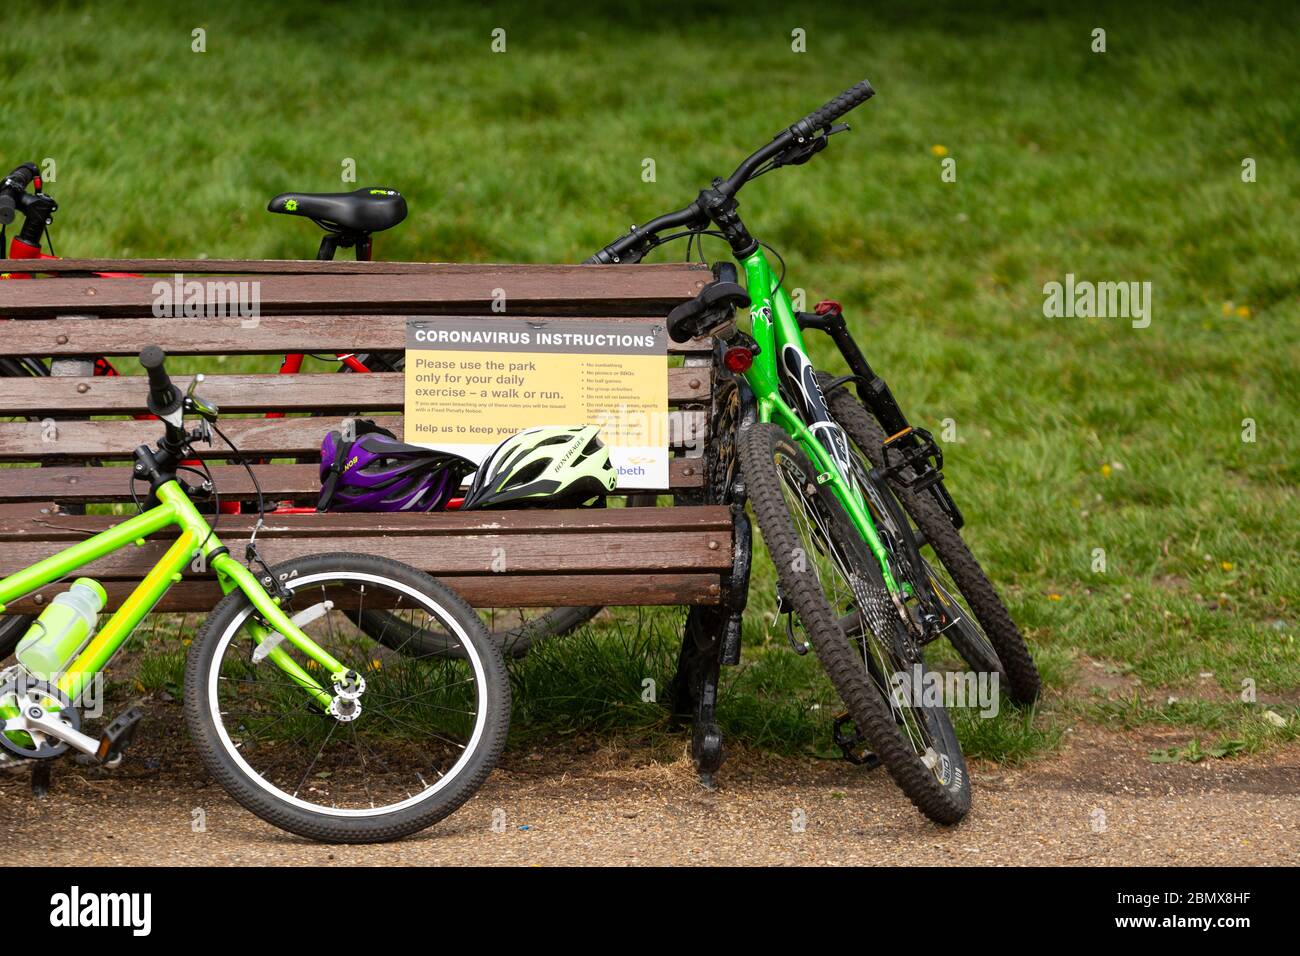 Bicycles leaning against a park bench bearing a coronavirus instruction sign in Clapham Common, during the covid-19 lockdown in London, 10 May 2020 Stock Photo